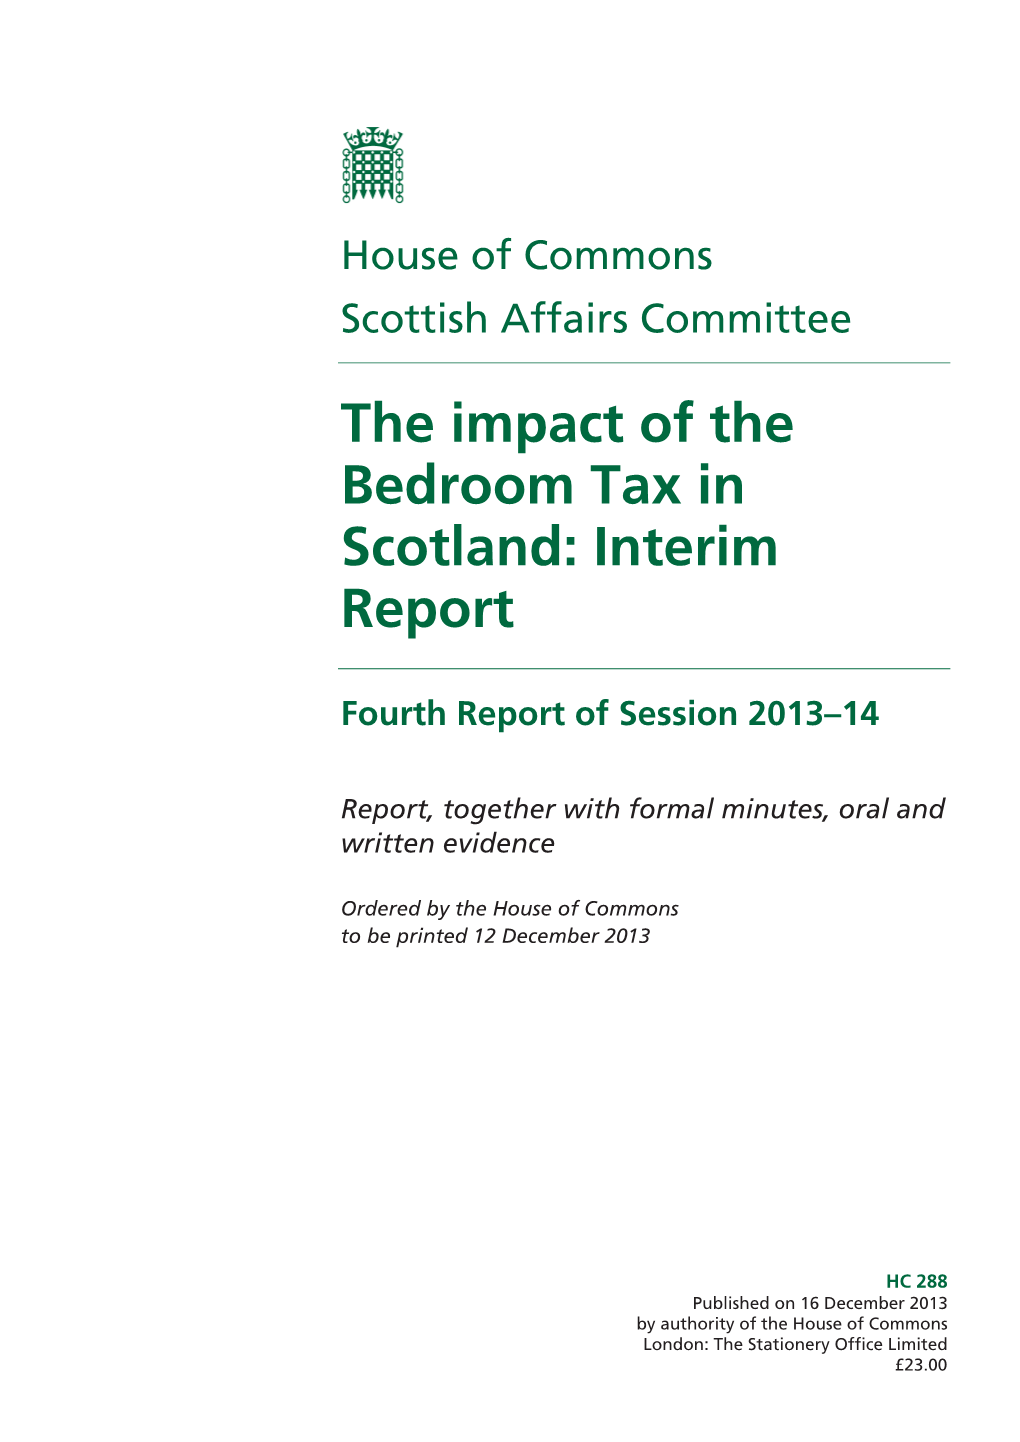 The Impact of the Bedroom Tax in Scotland: Interim Report